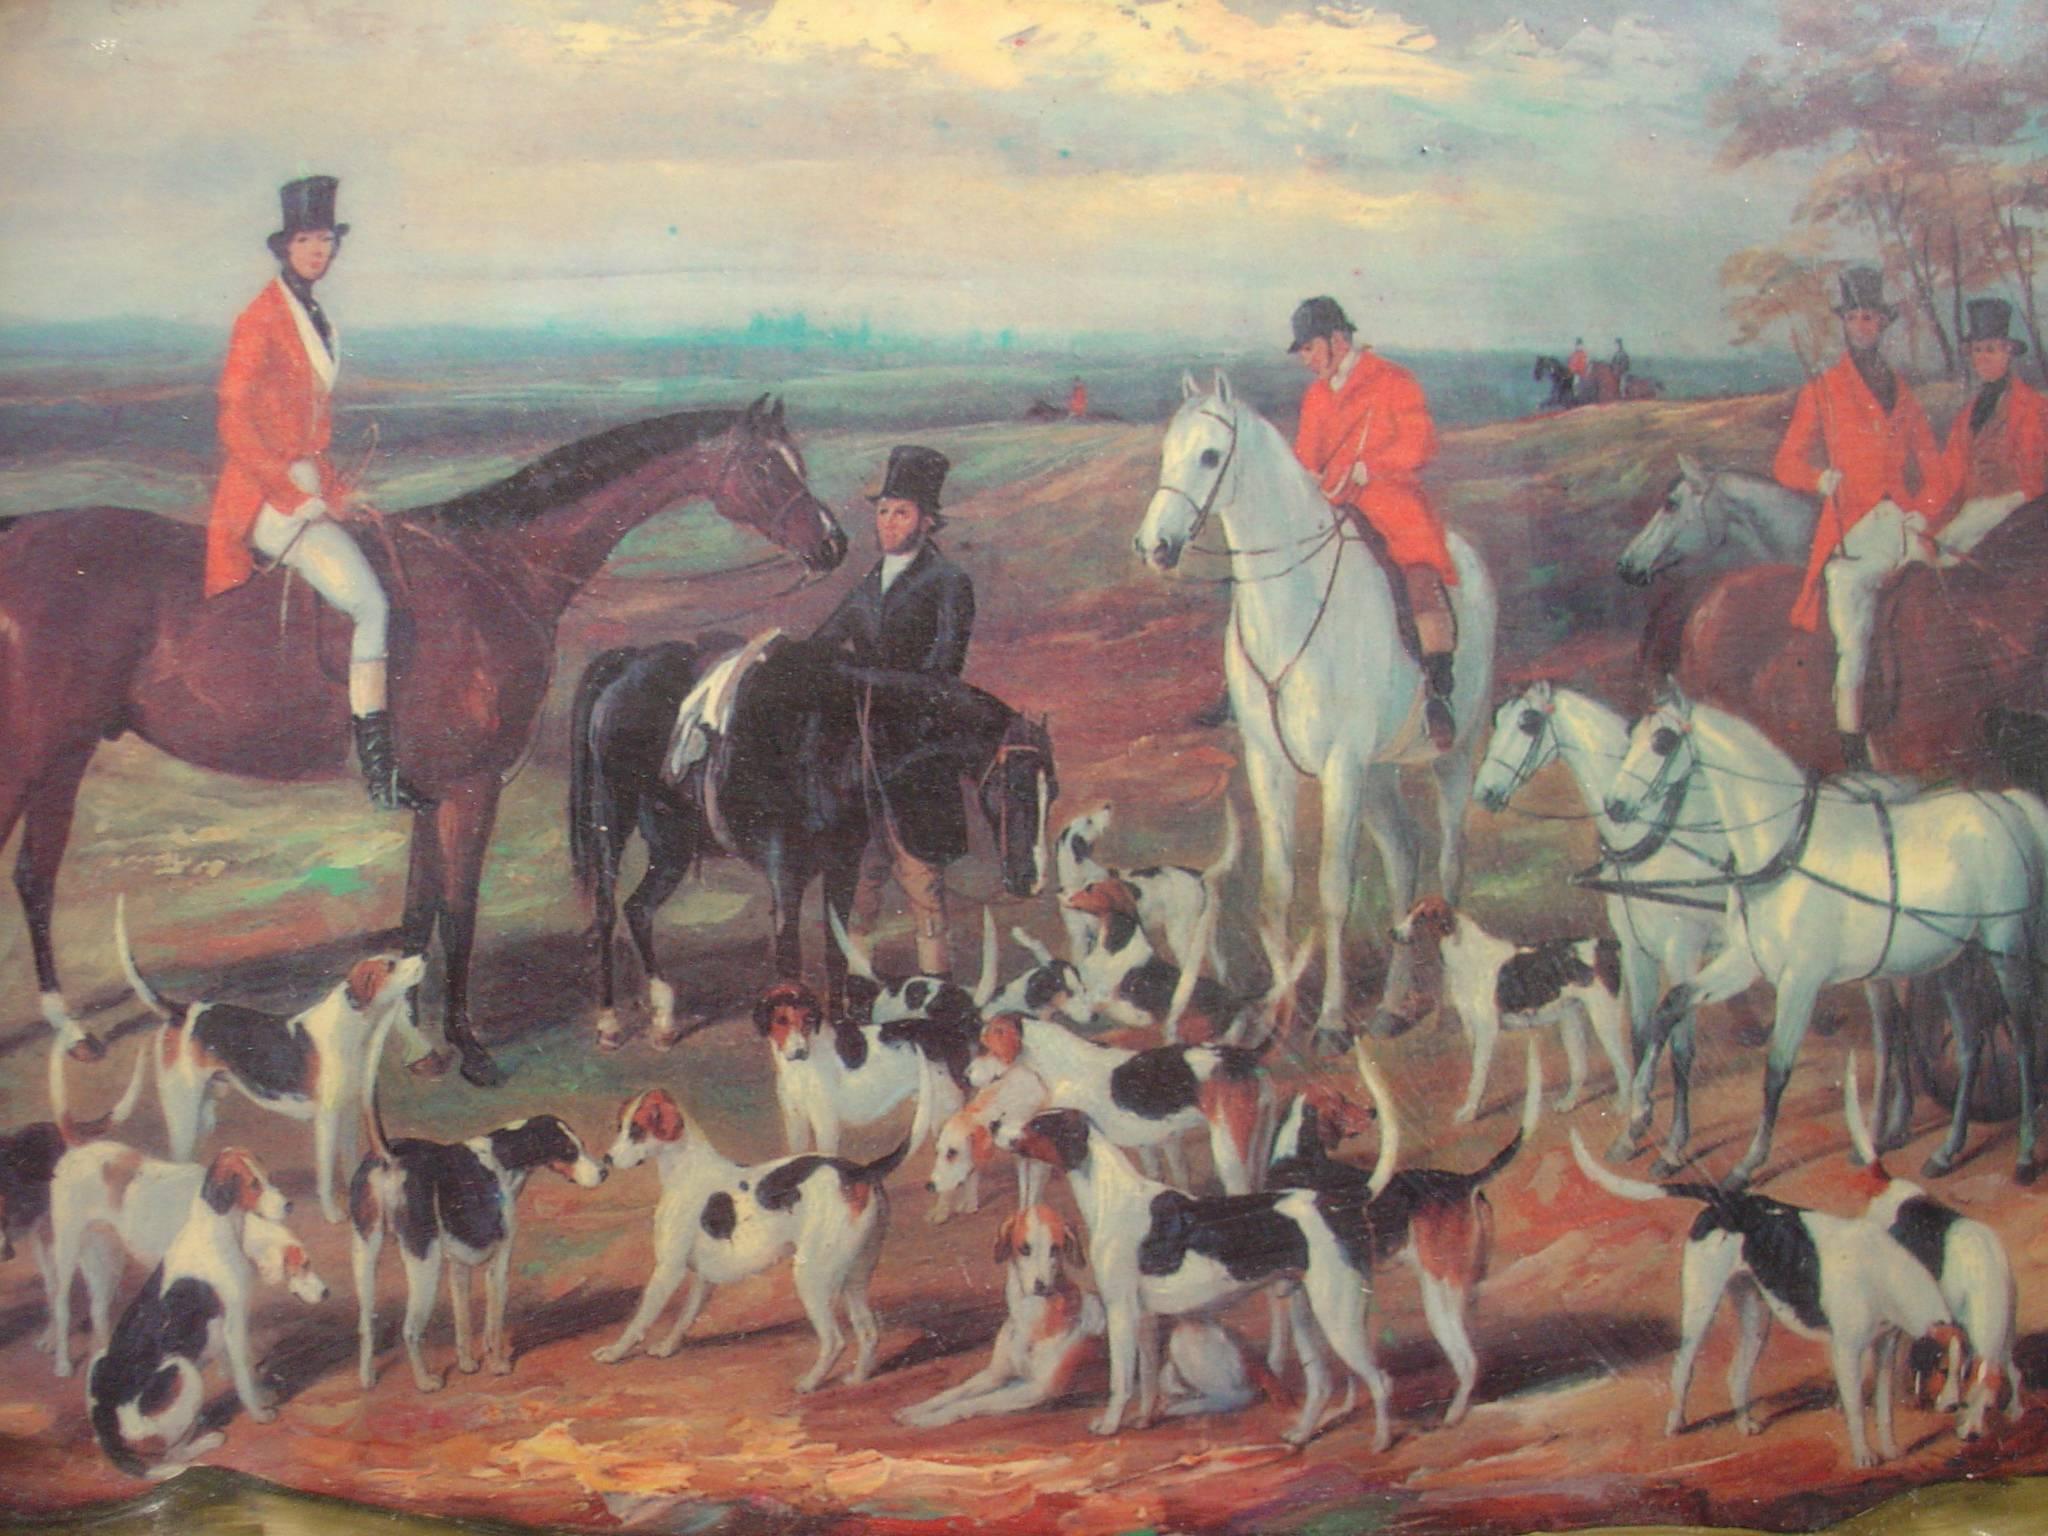 Rococo Hand-Painted French Platter Depicting an English Hunt Scene, 1900s